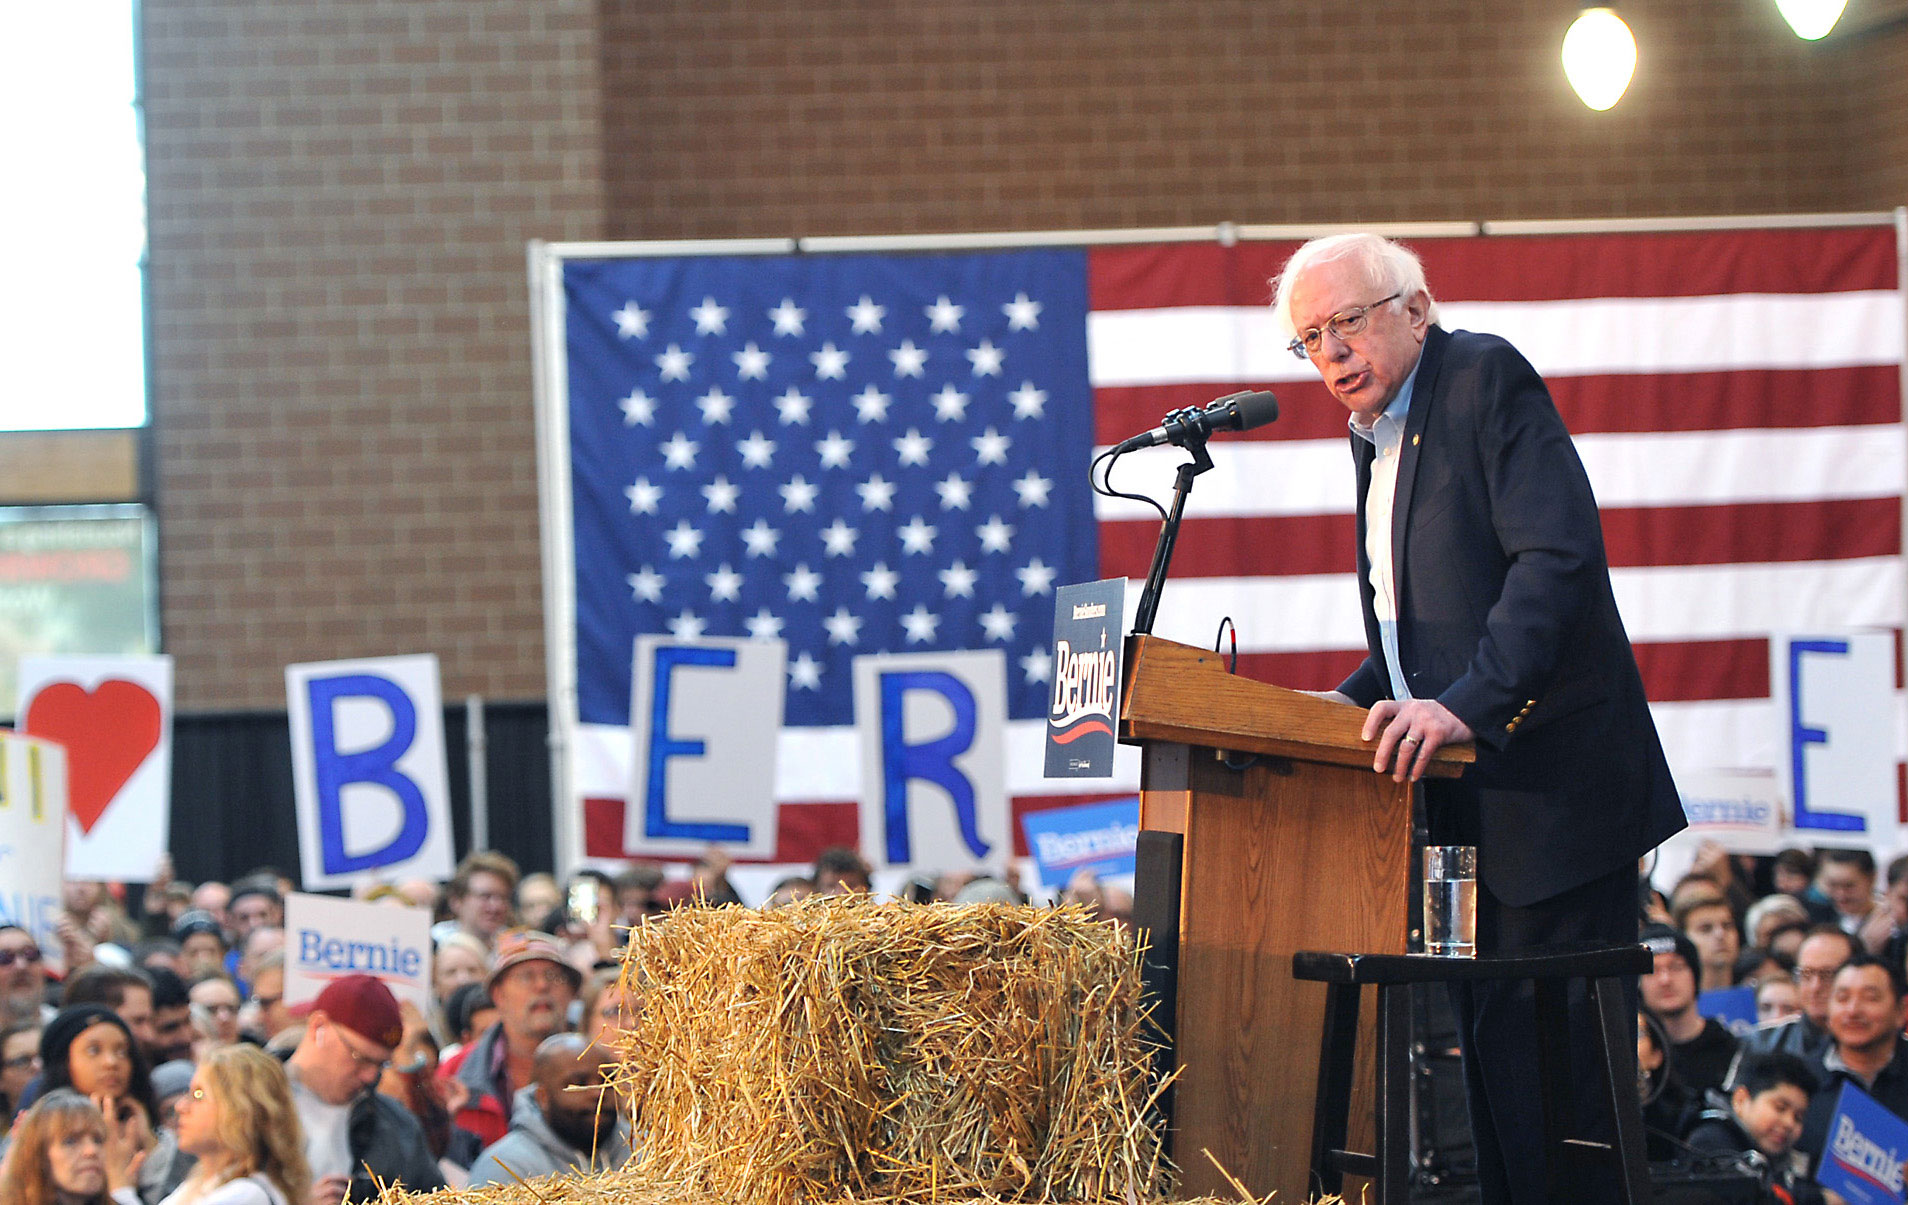 Sanders Connects Farmers' Struggles to Labor Movement in Iowa Rallies